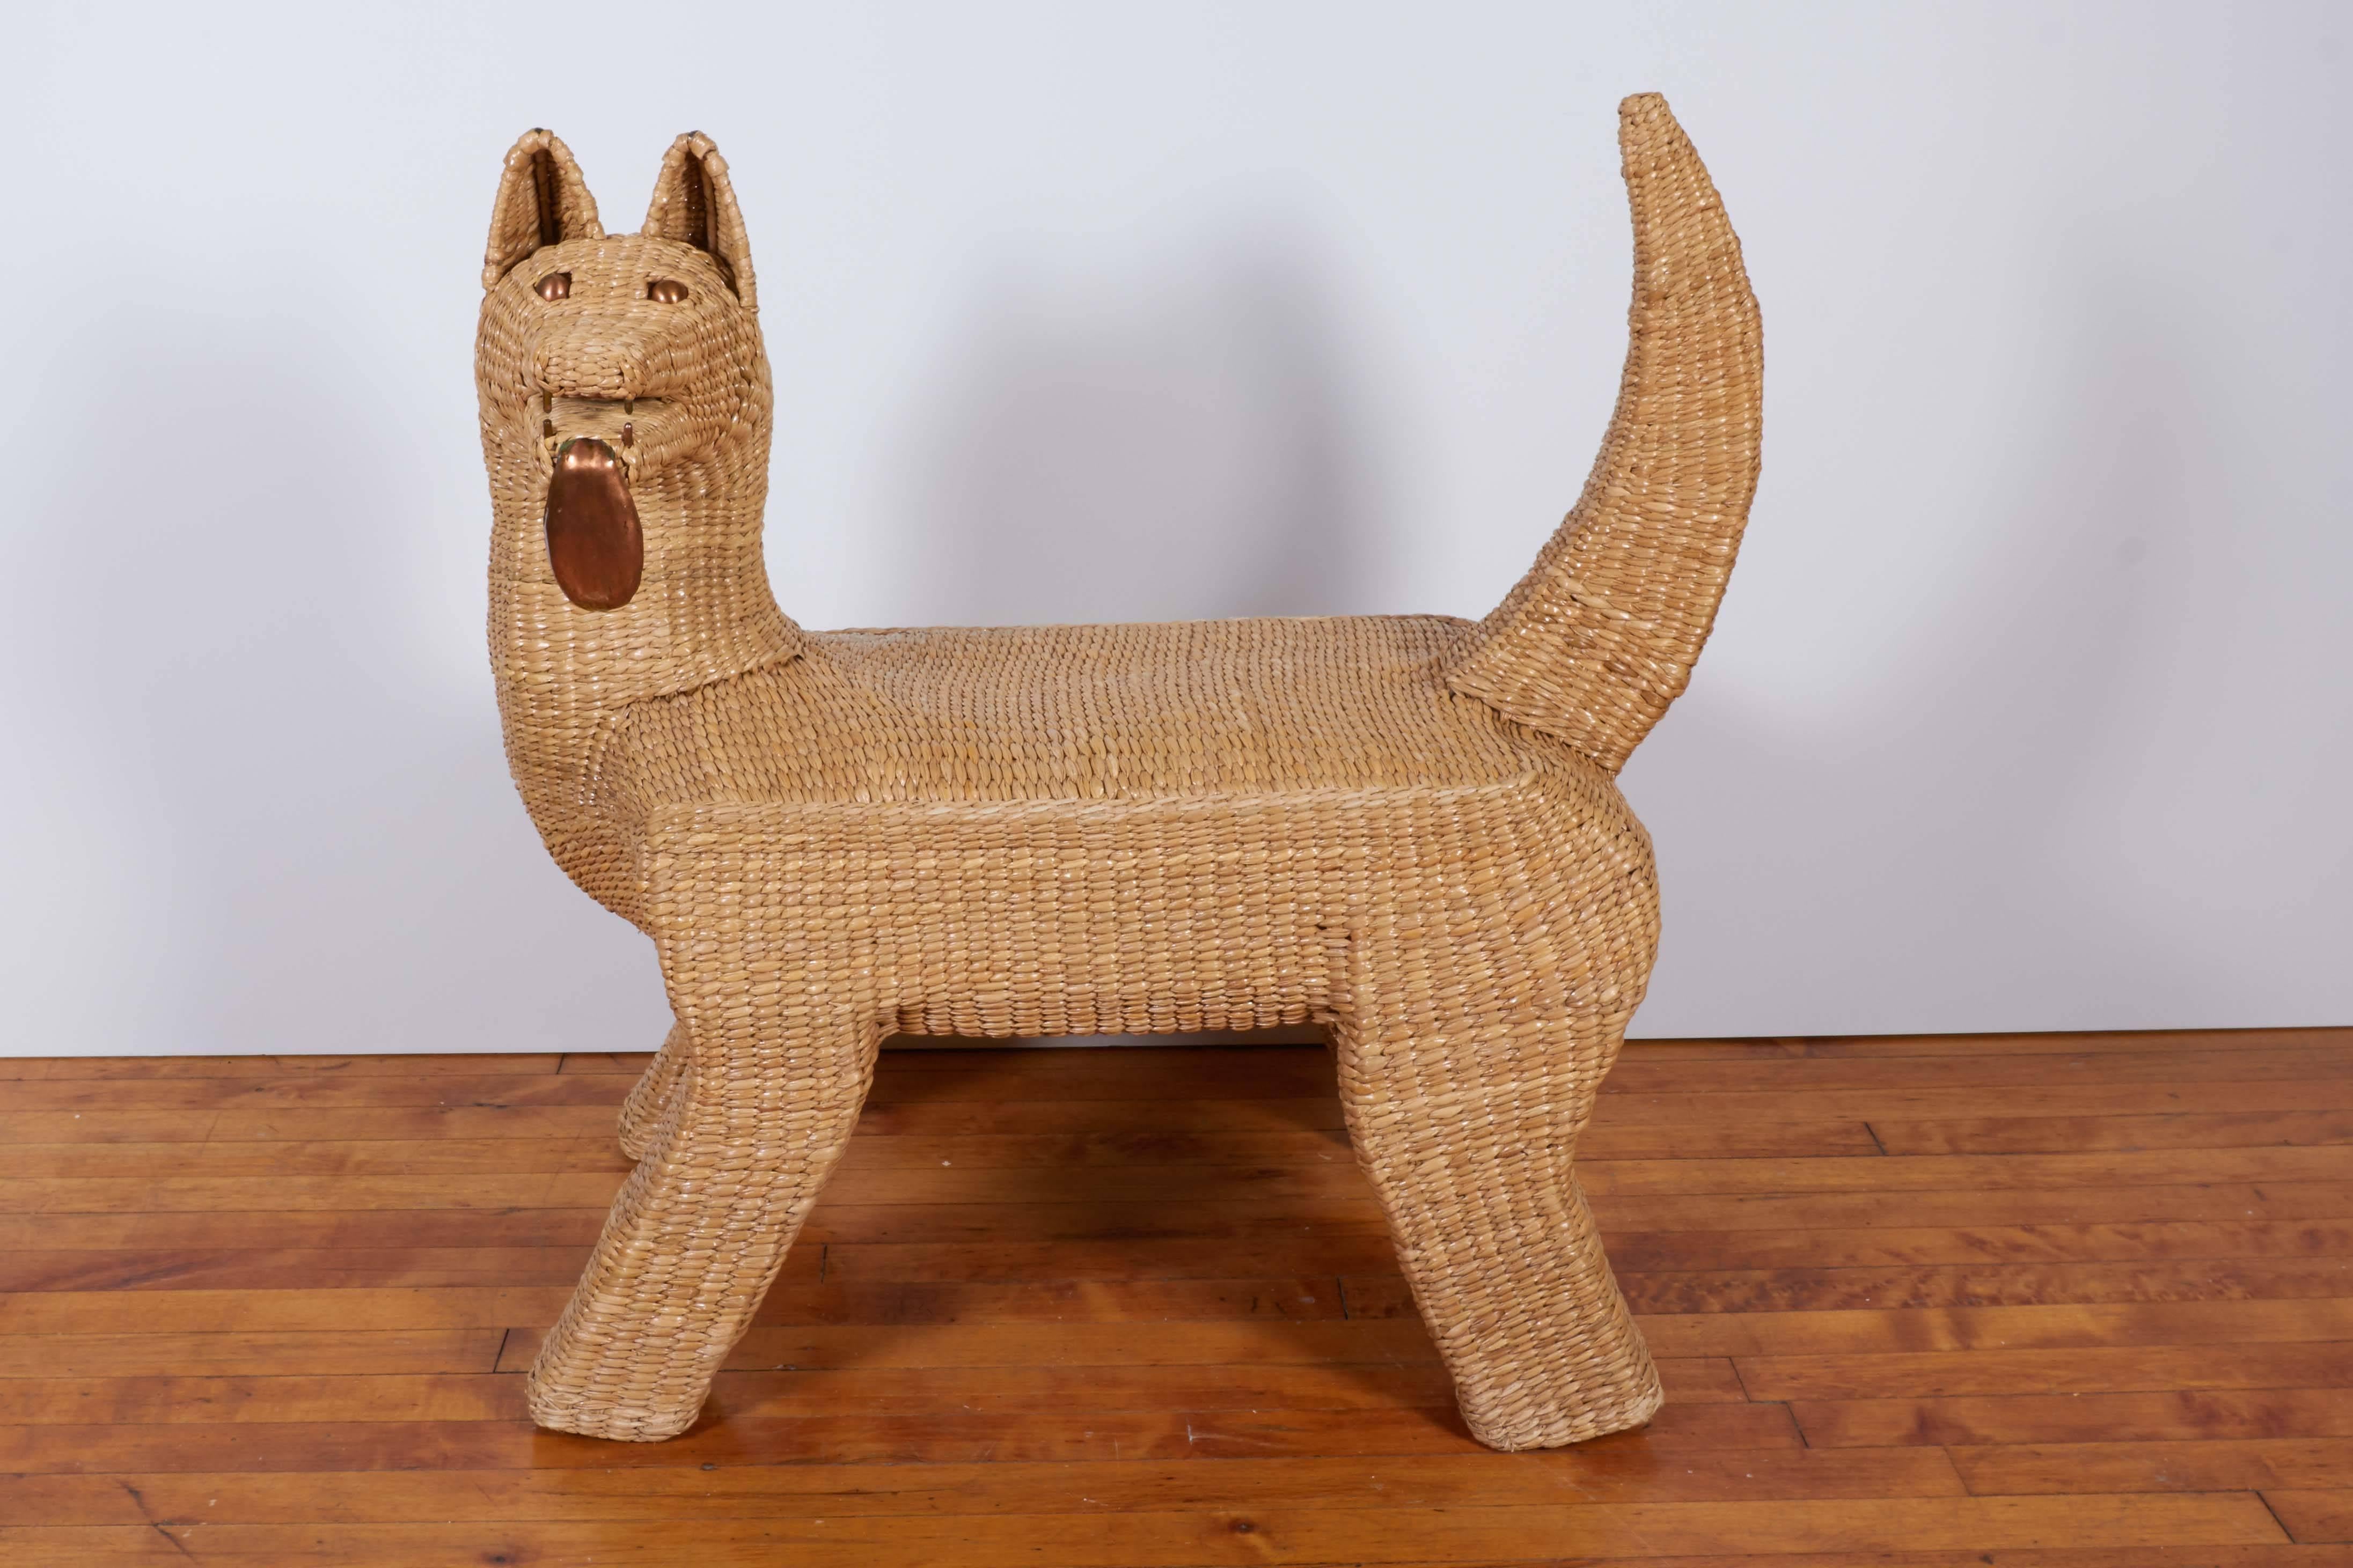 A sculptural bench by artist Mario Lopez Torres, produced in Mexico, circa 1970s, designed as a coyote, crafted of woven wicker, the eyes teeth and tongue in copper. Includes the artist's signature and date to the underside of the seat. Very good